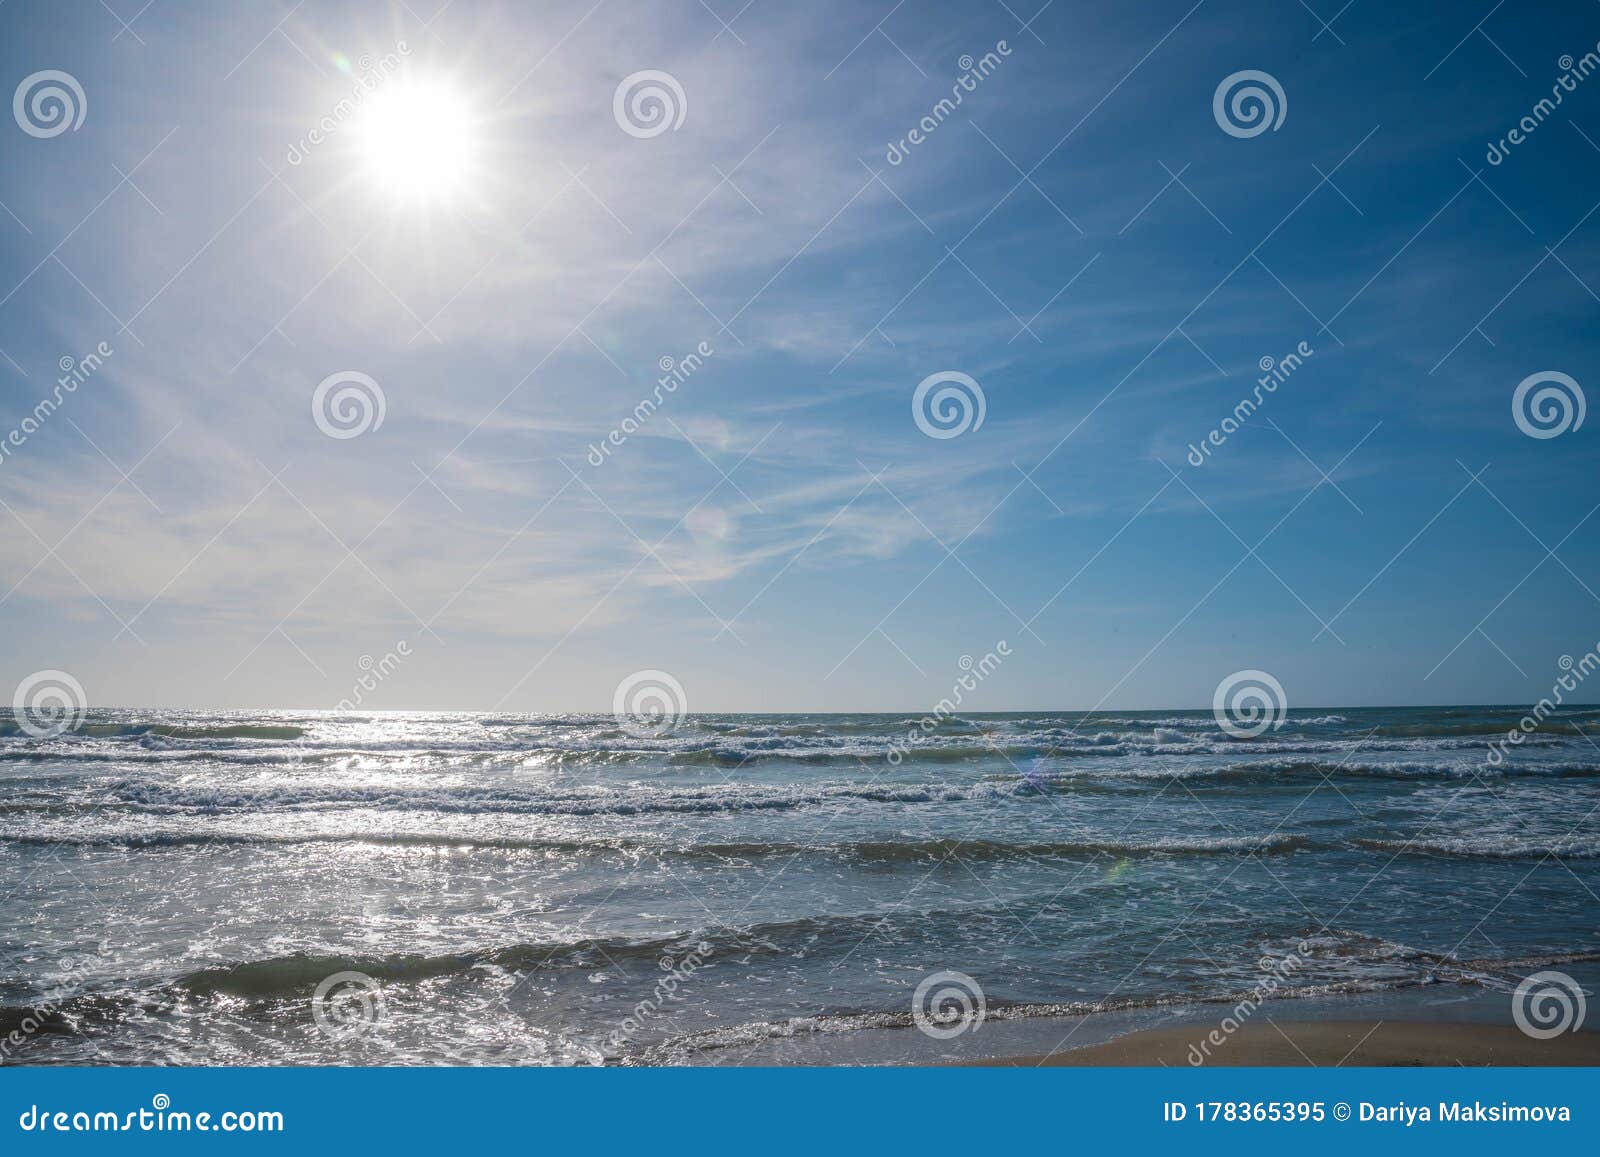 sea, waves and sand on the beach of paso oscuro in lazio in italy